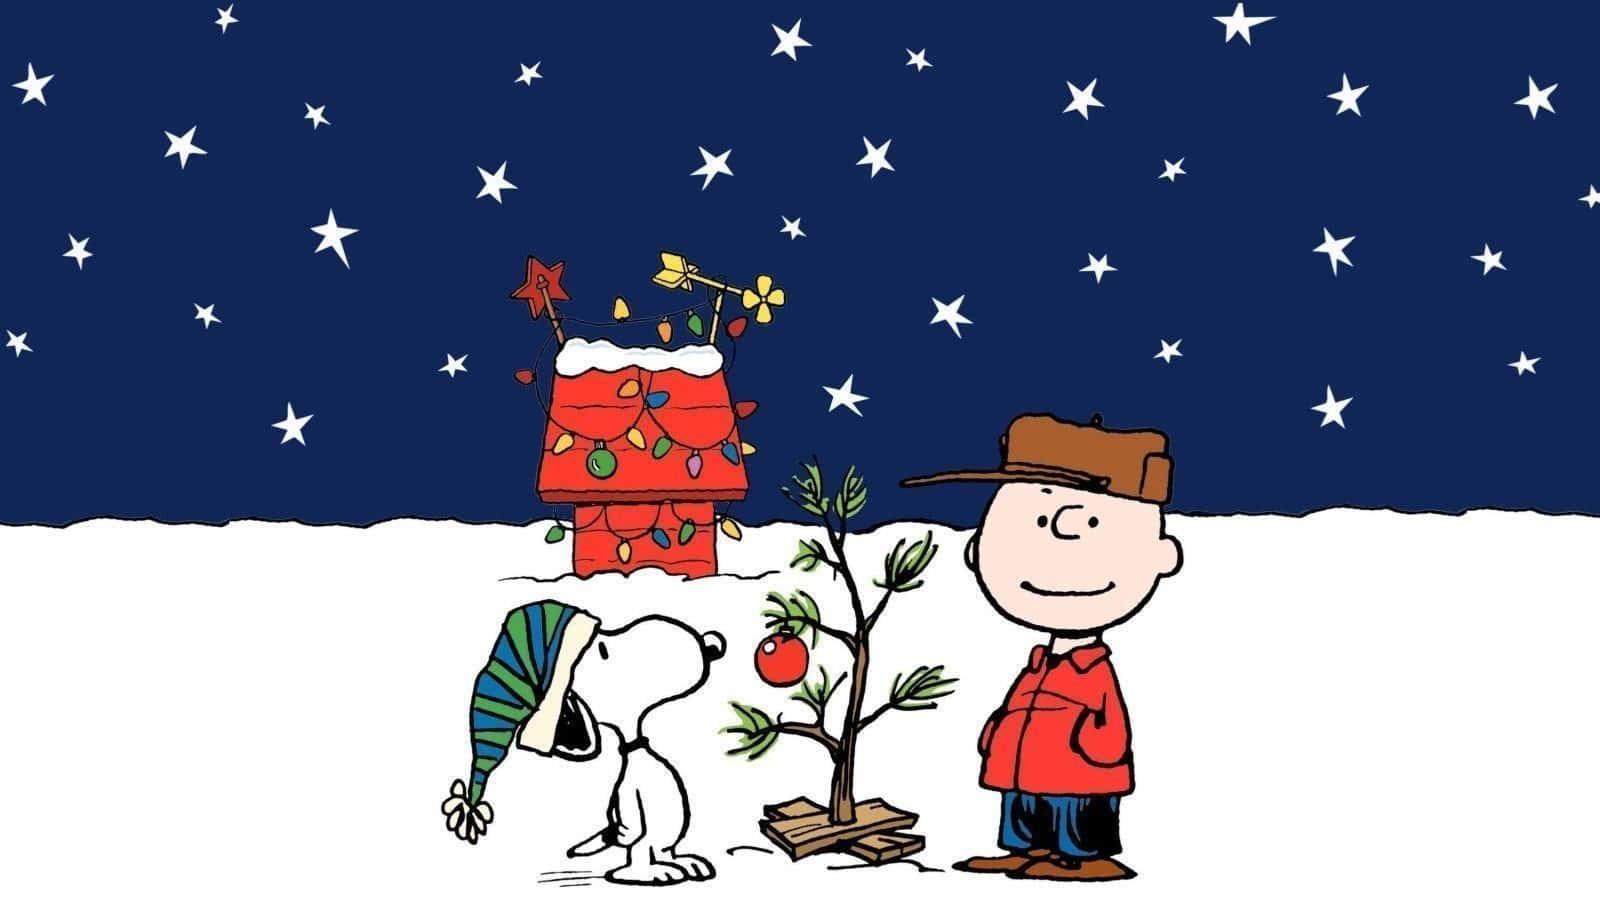 Snoopy Christmas Background Wallpaper